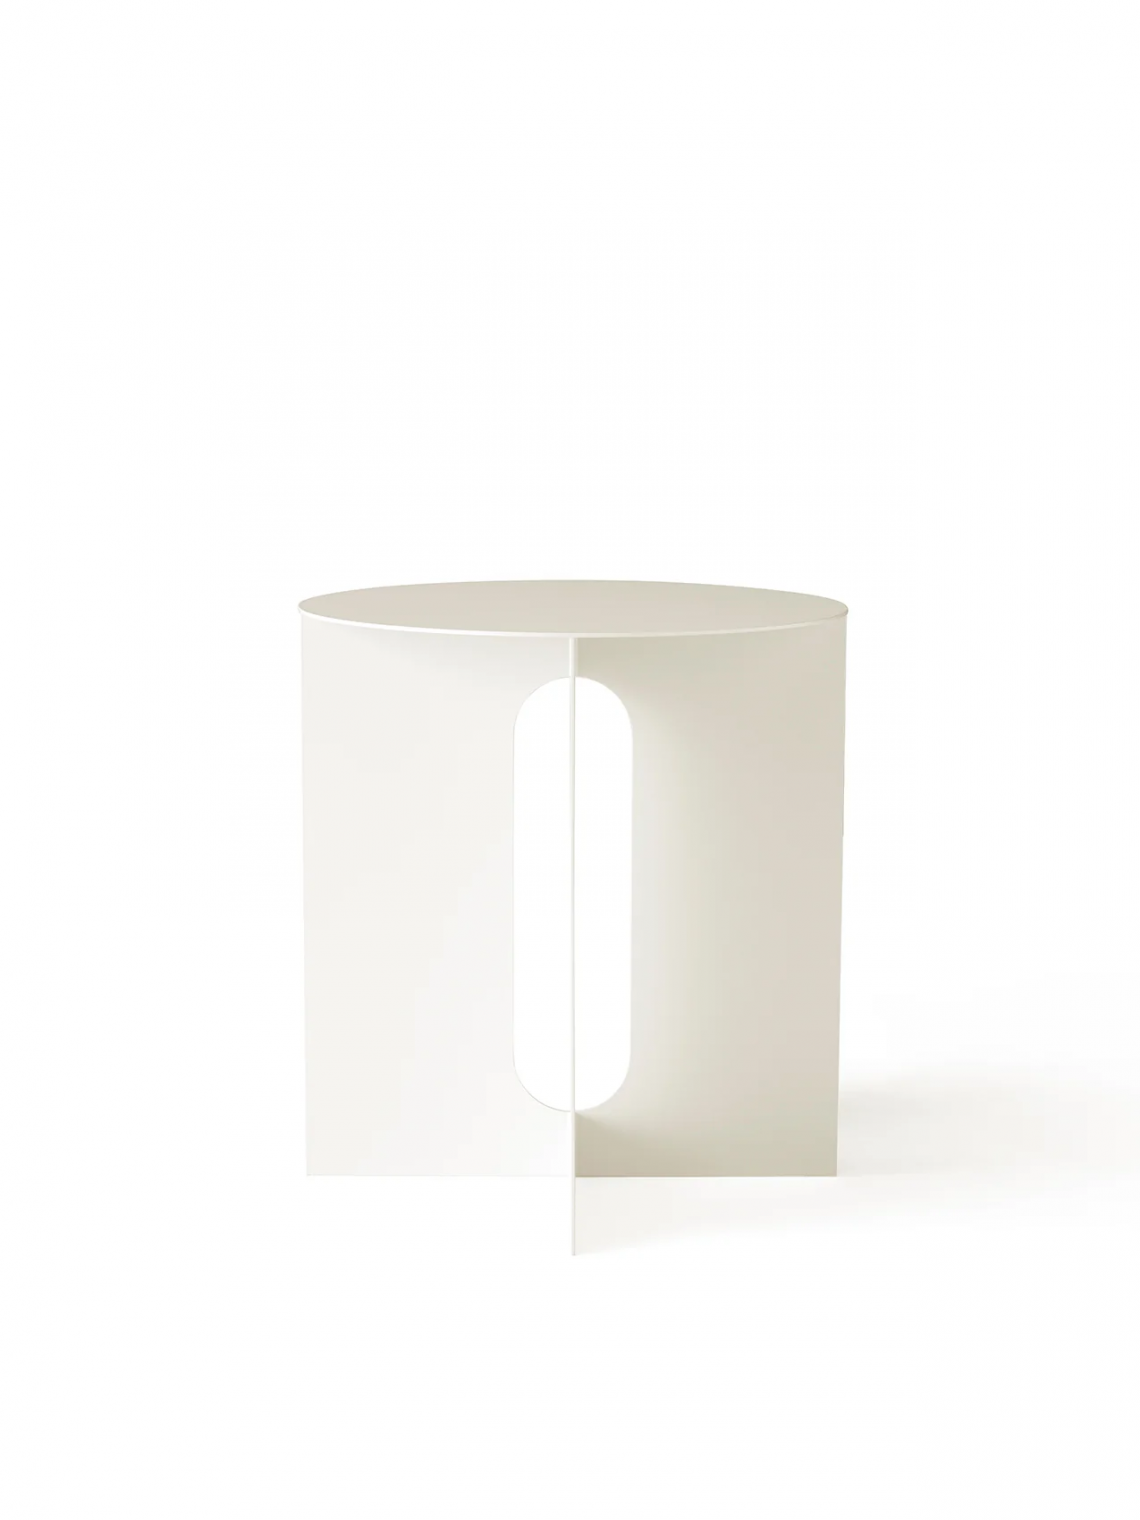 Androgyne Side Table Top边几细节图4